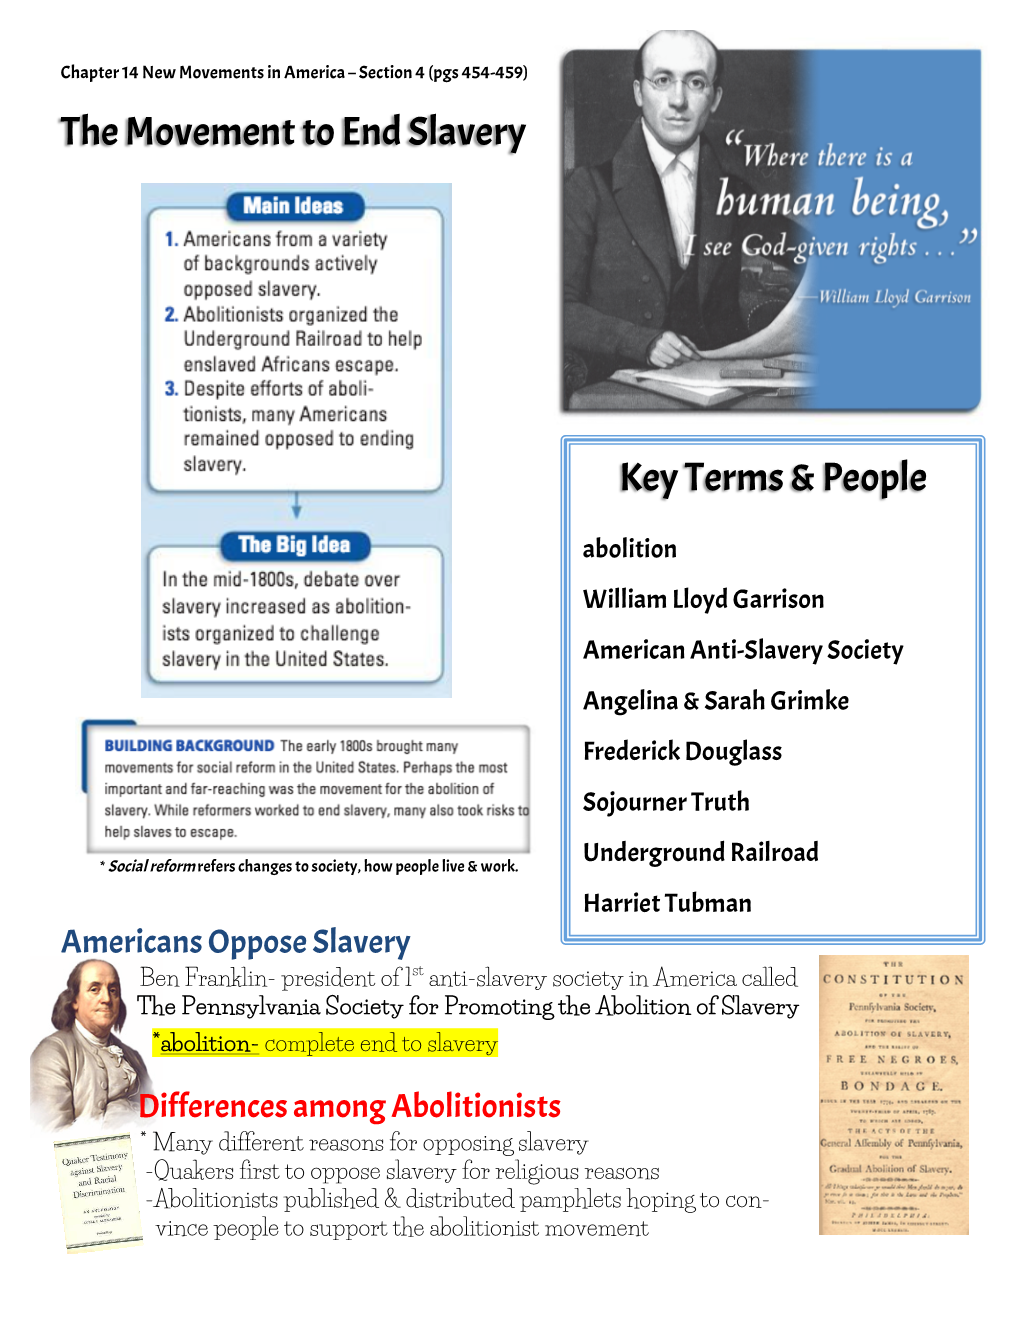 The Movement to End Slavery Key Terms & People